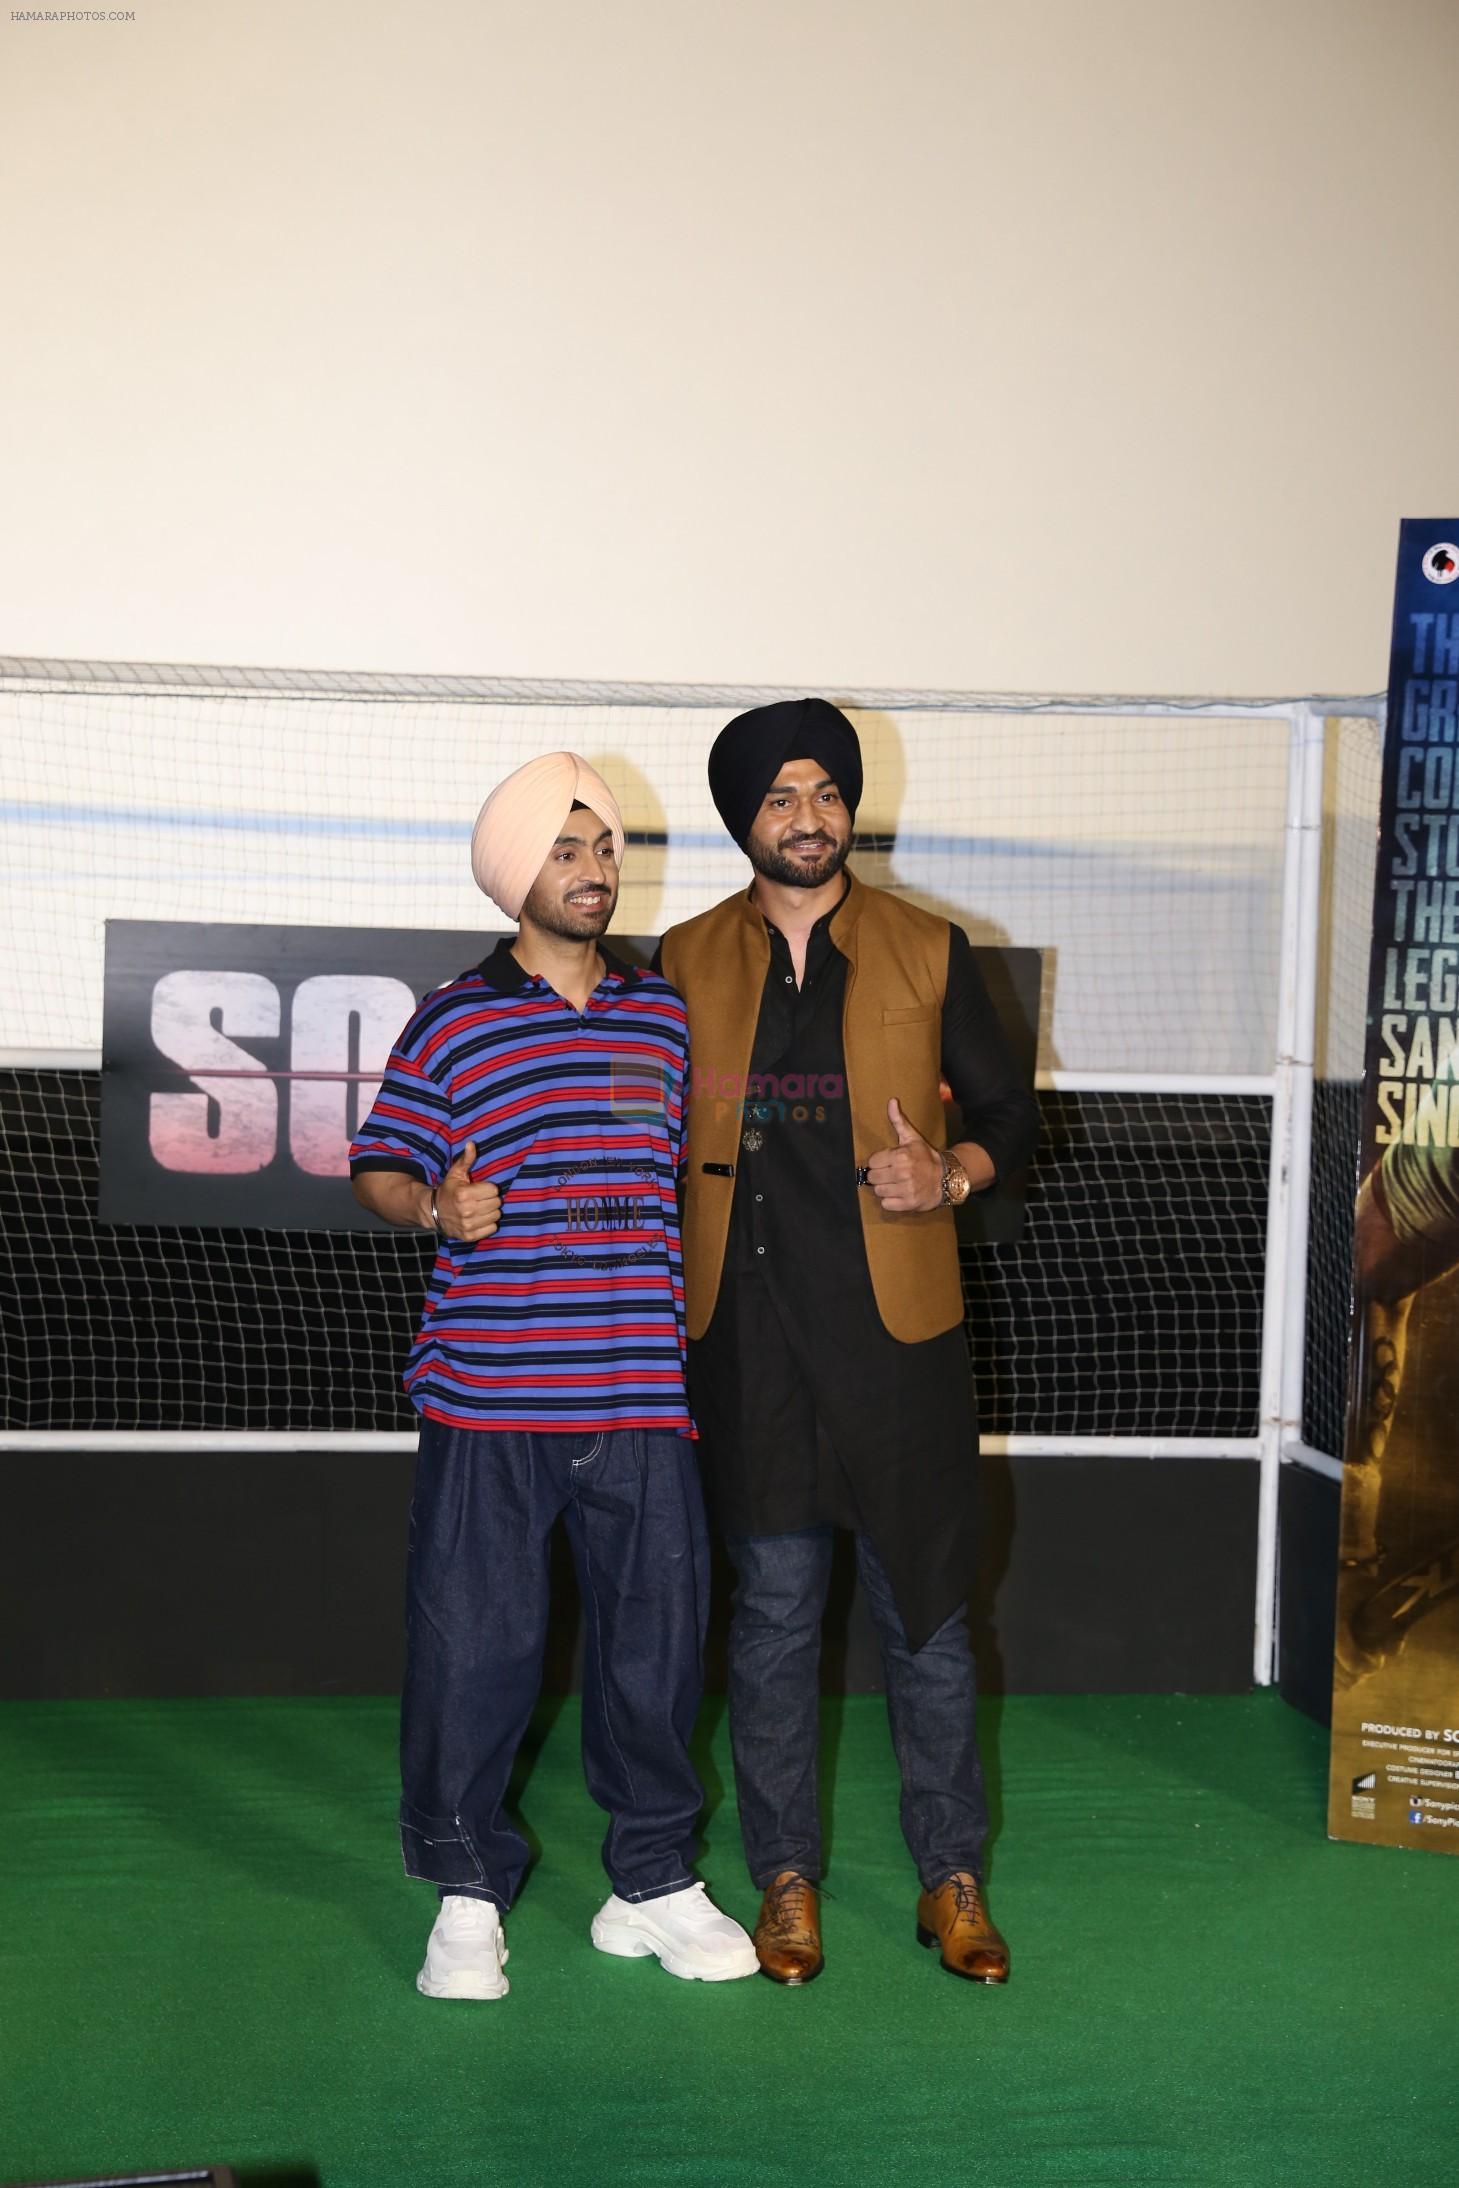 Diljit Dosanjh at the Trailer launch of film Soorma at pvr juhu in mumbai on 11th June 2018